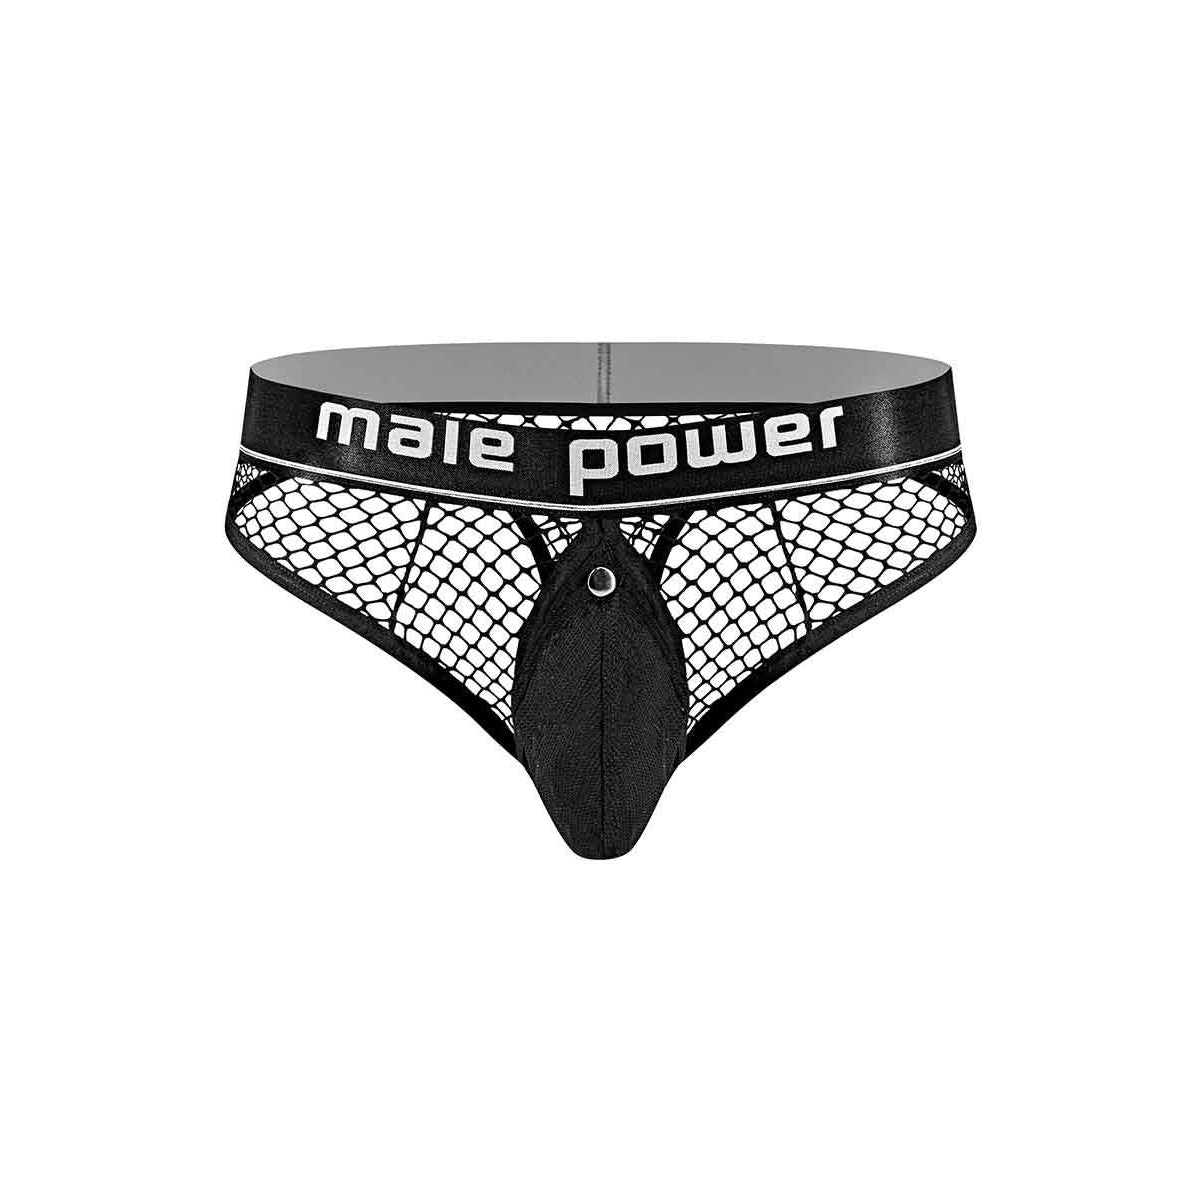 Cock Pit Net Cock Ring Thong